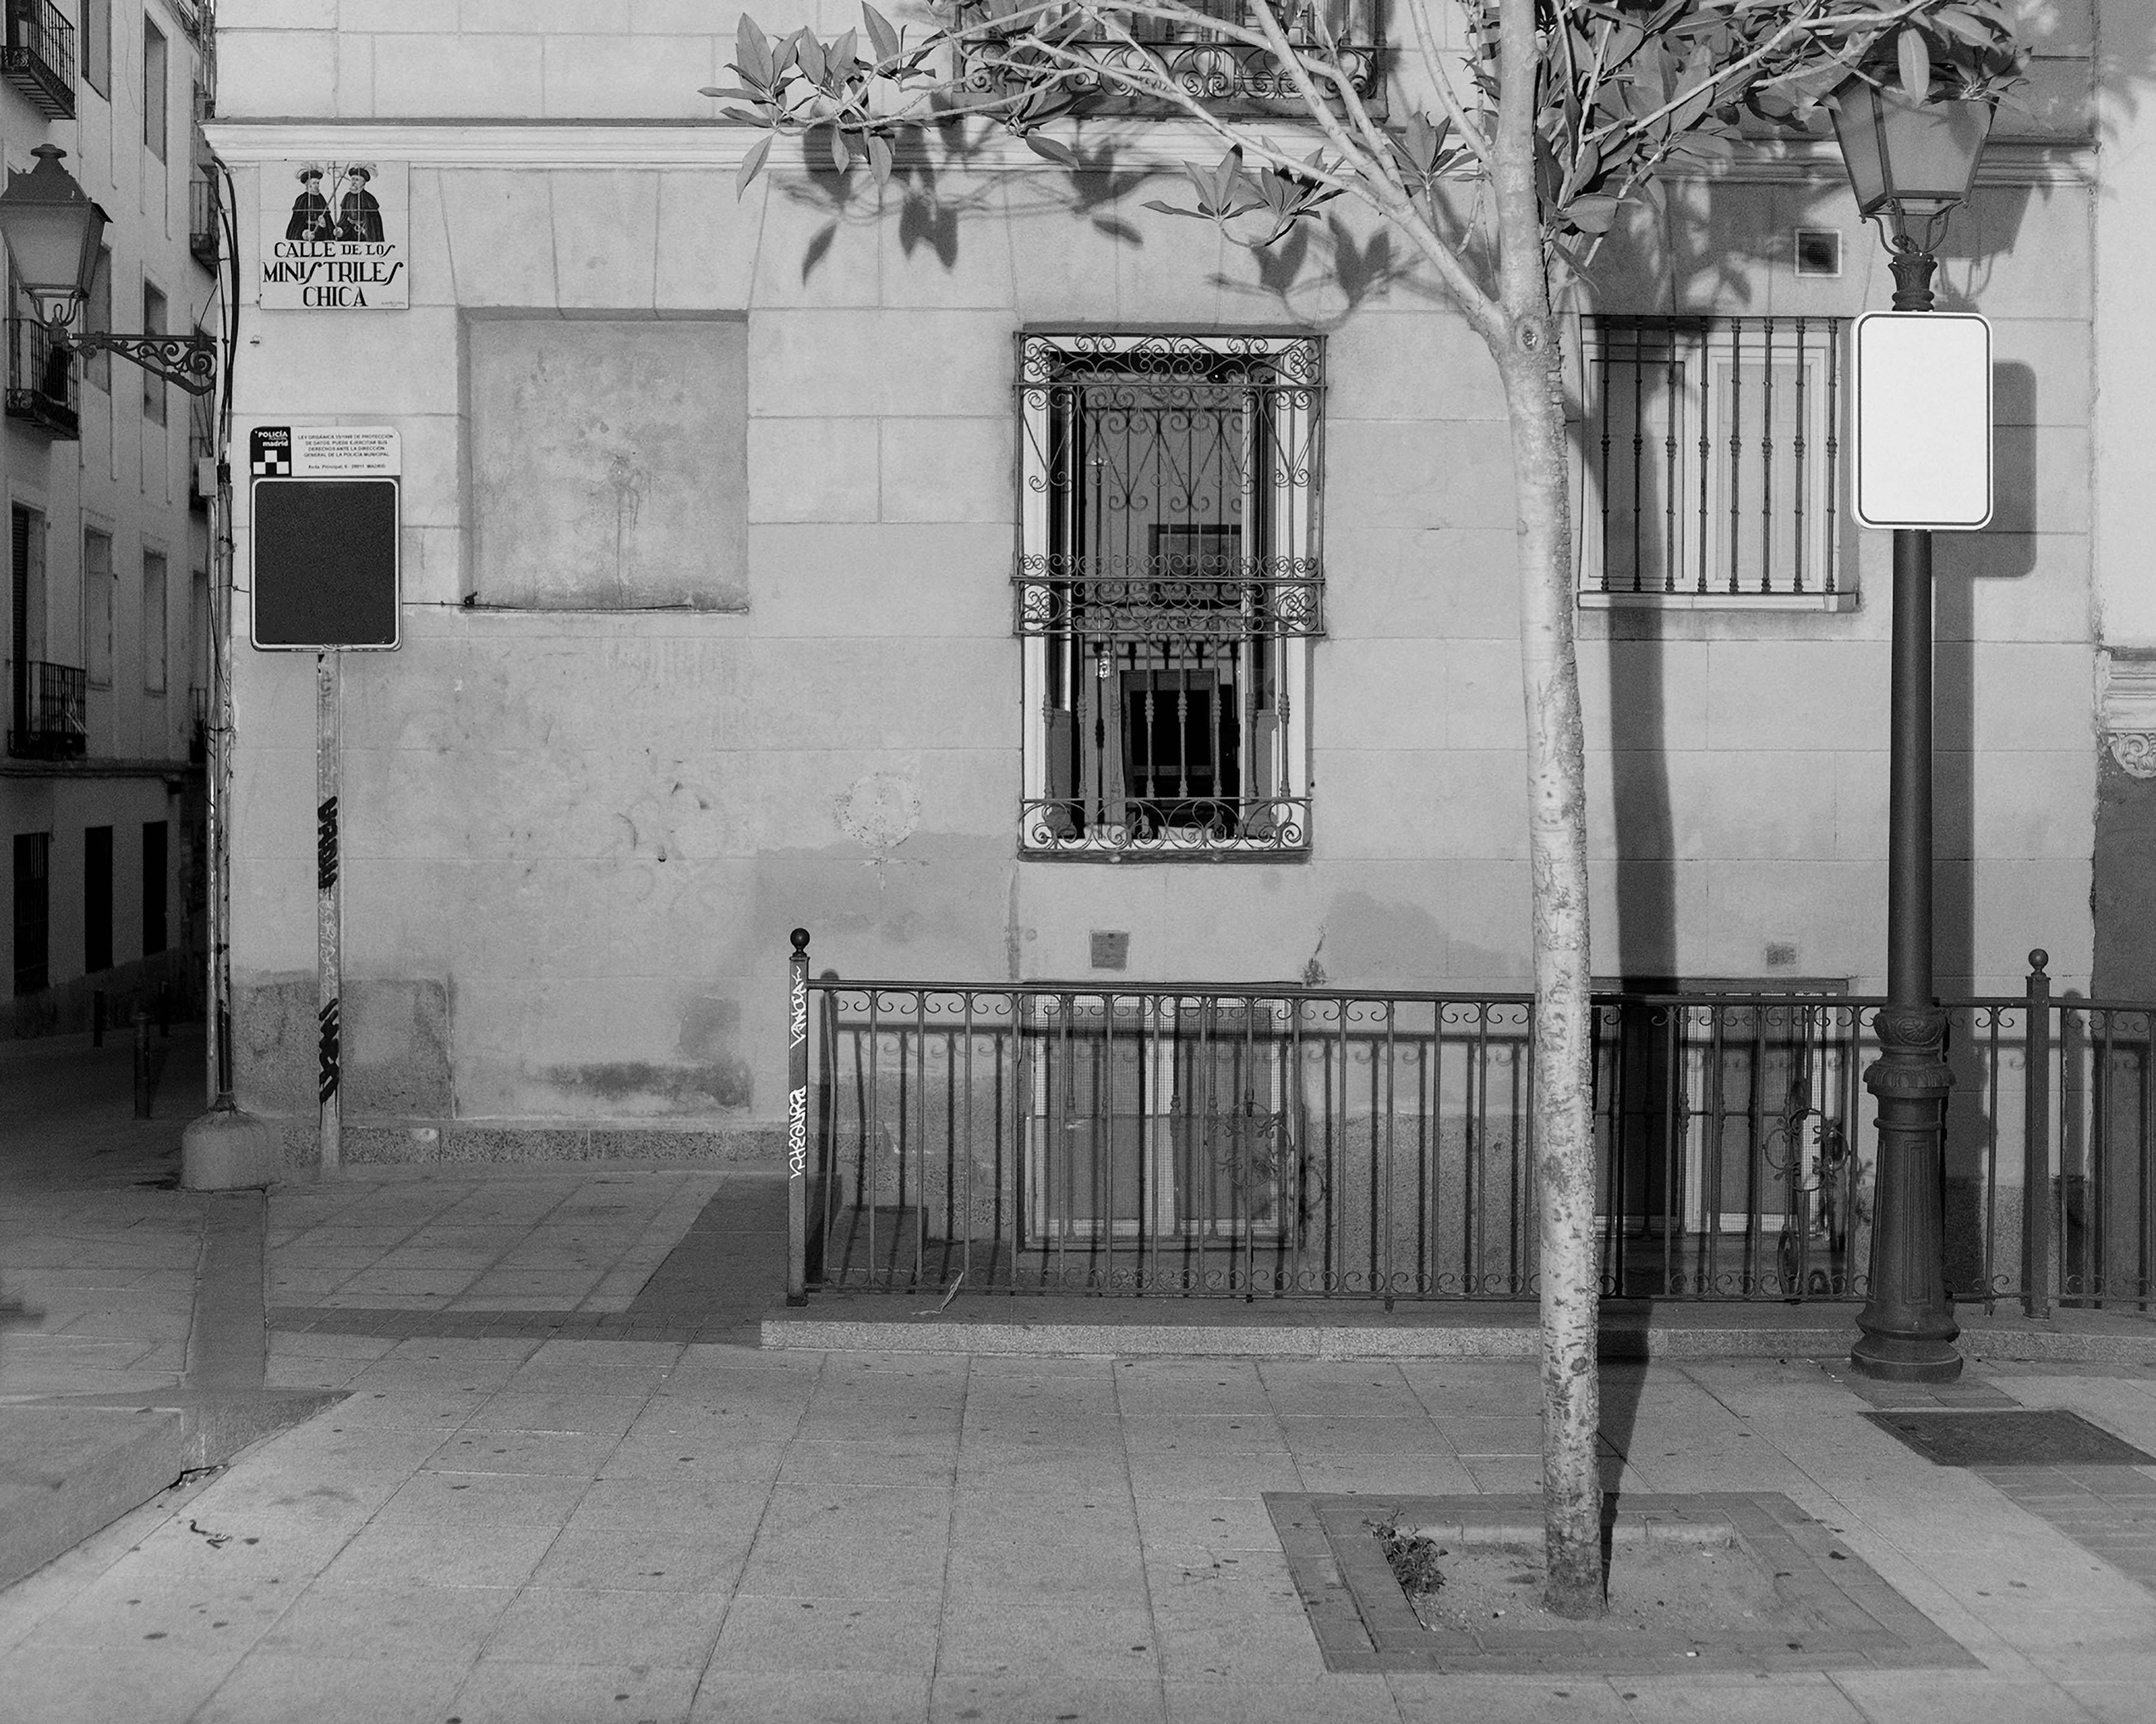 Black and white image of a Spanish looking street. No people are visible.